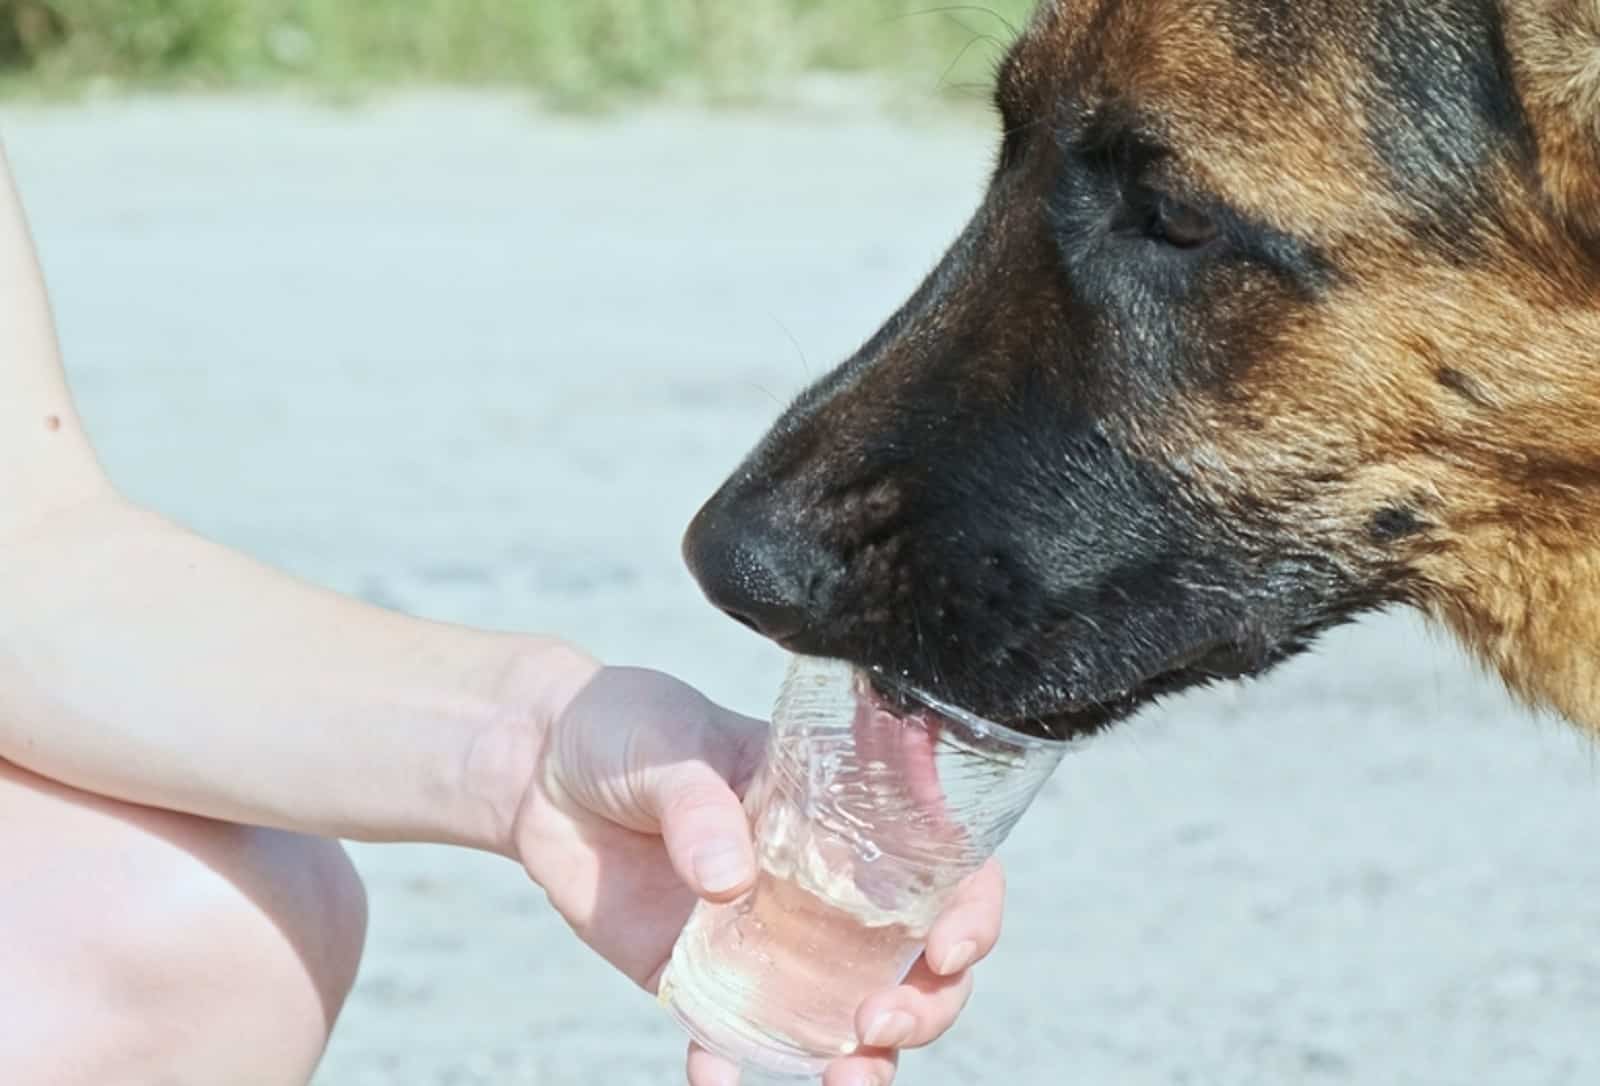 german shepherd drinking water from a plastic cup